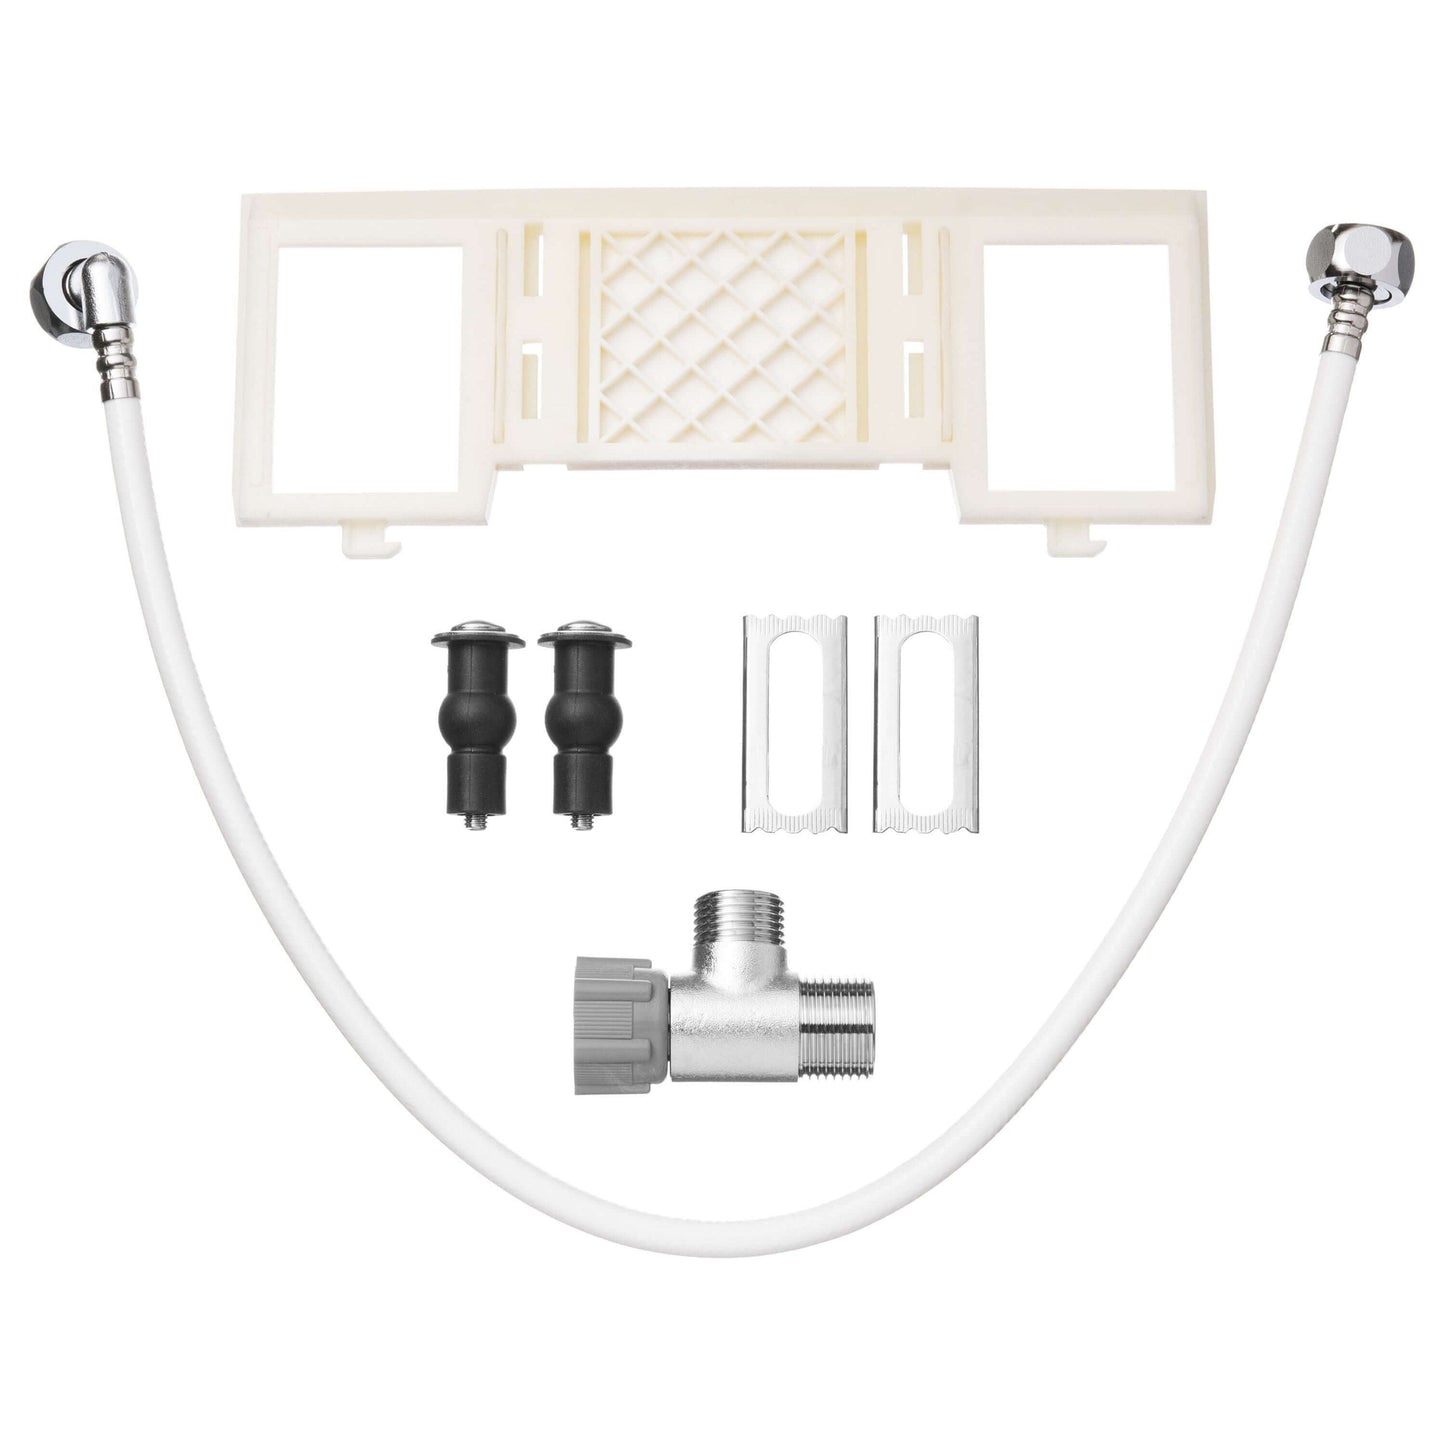 Swash Thinline T44 Bidet Seat - top view of included parts